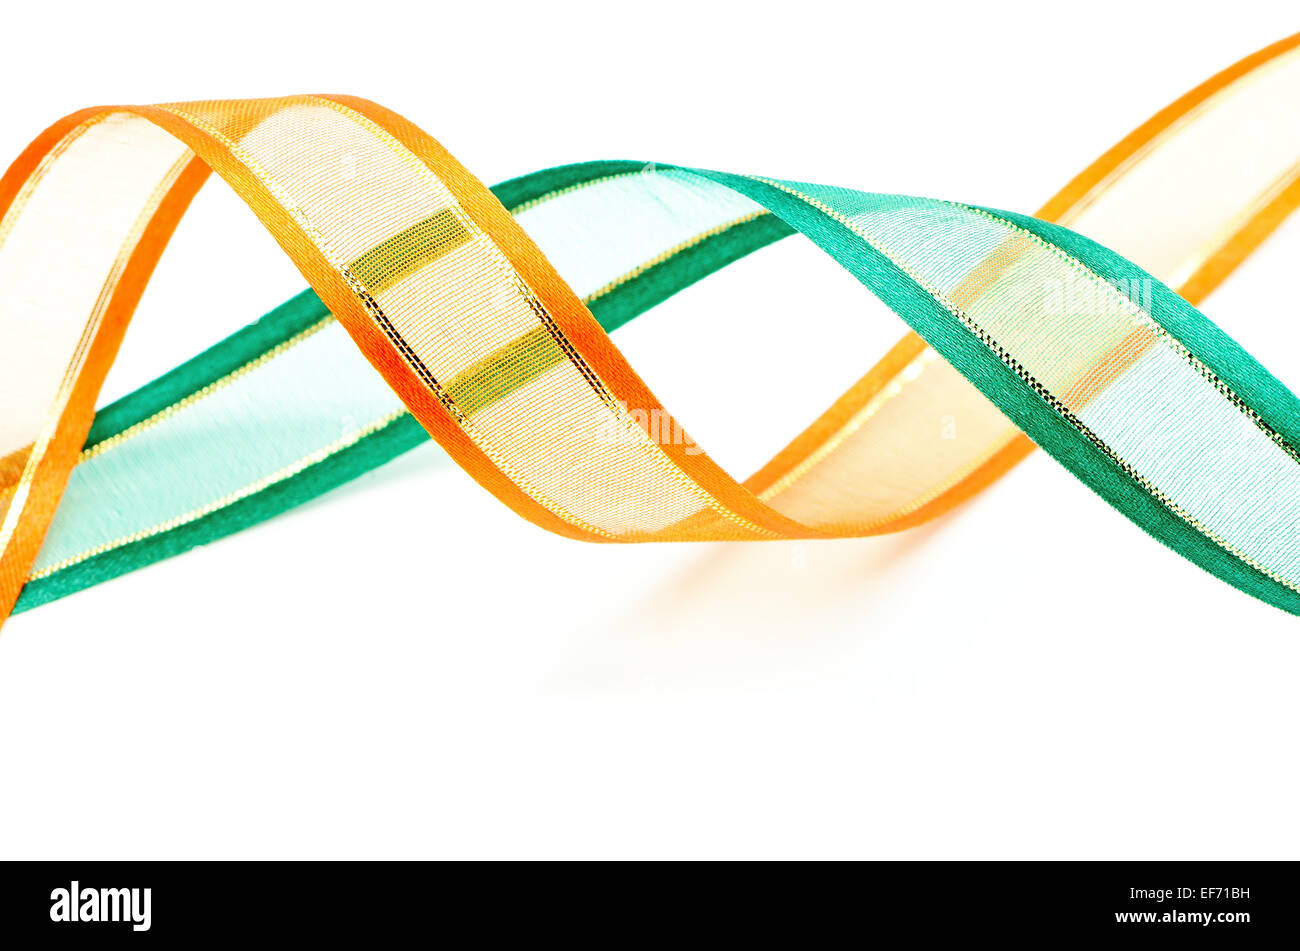 Orange and green ribbon, isolated on a white background Stock Photo